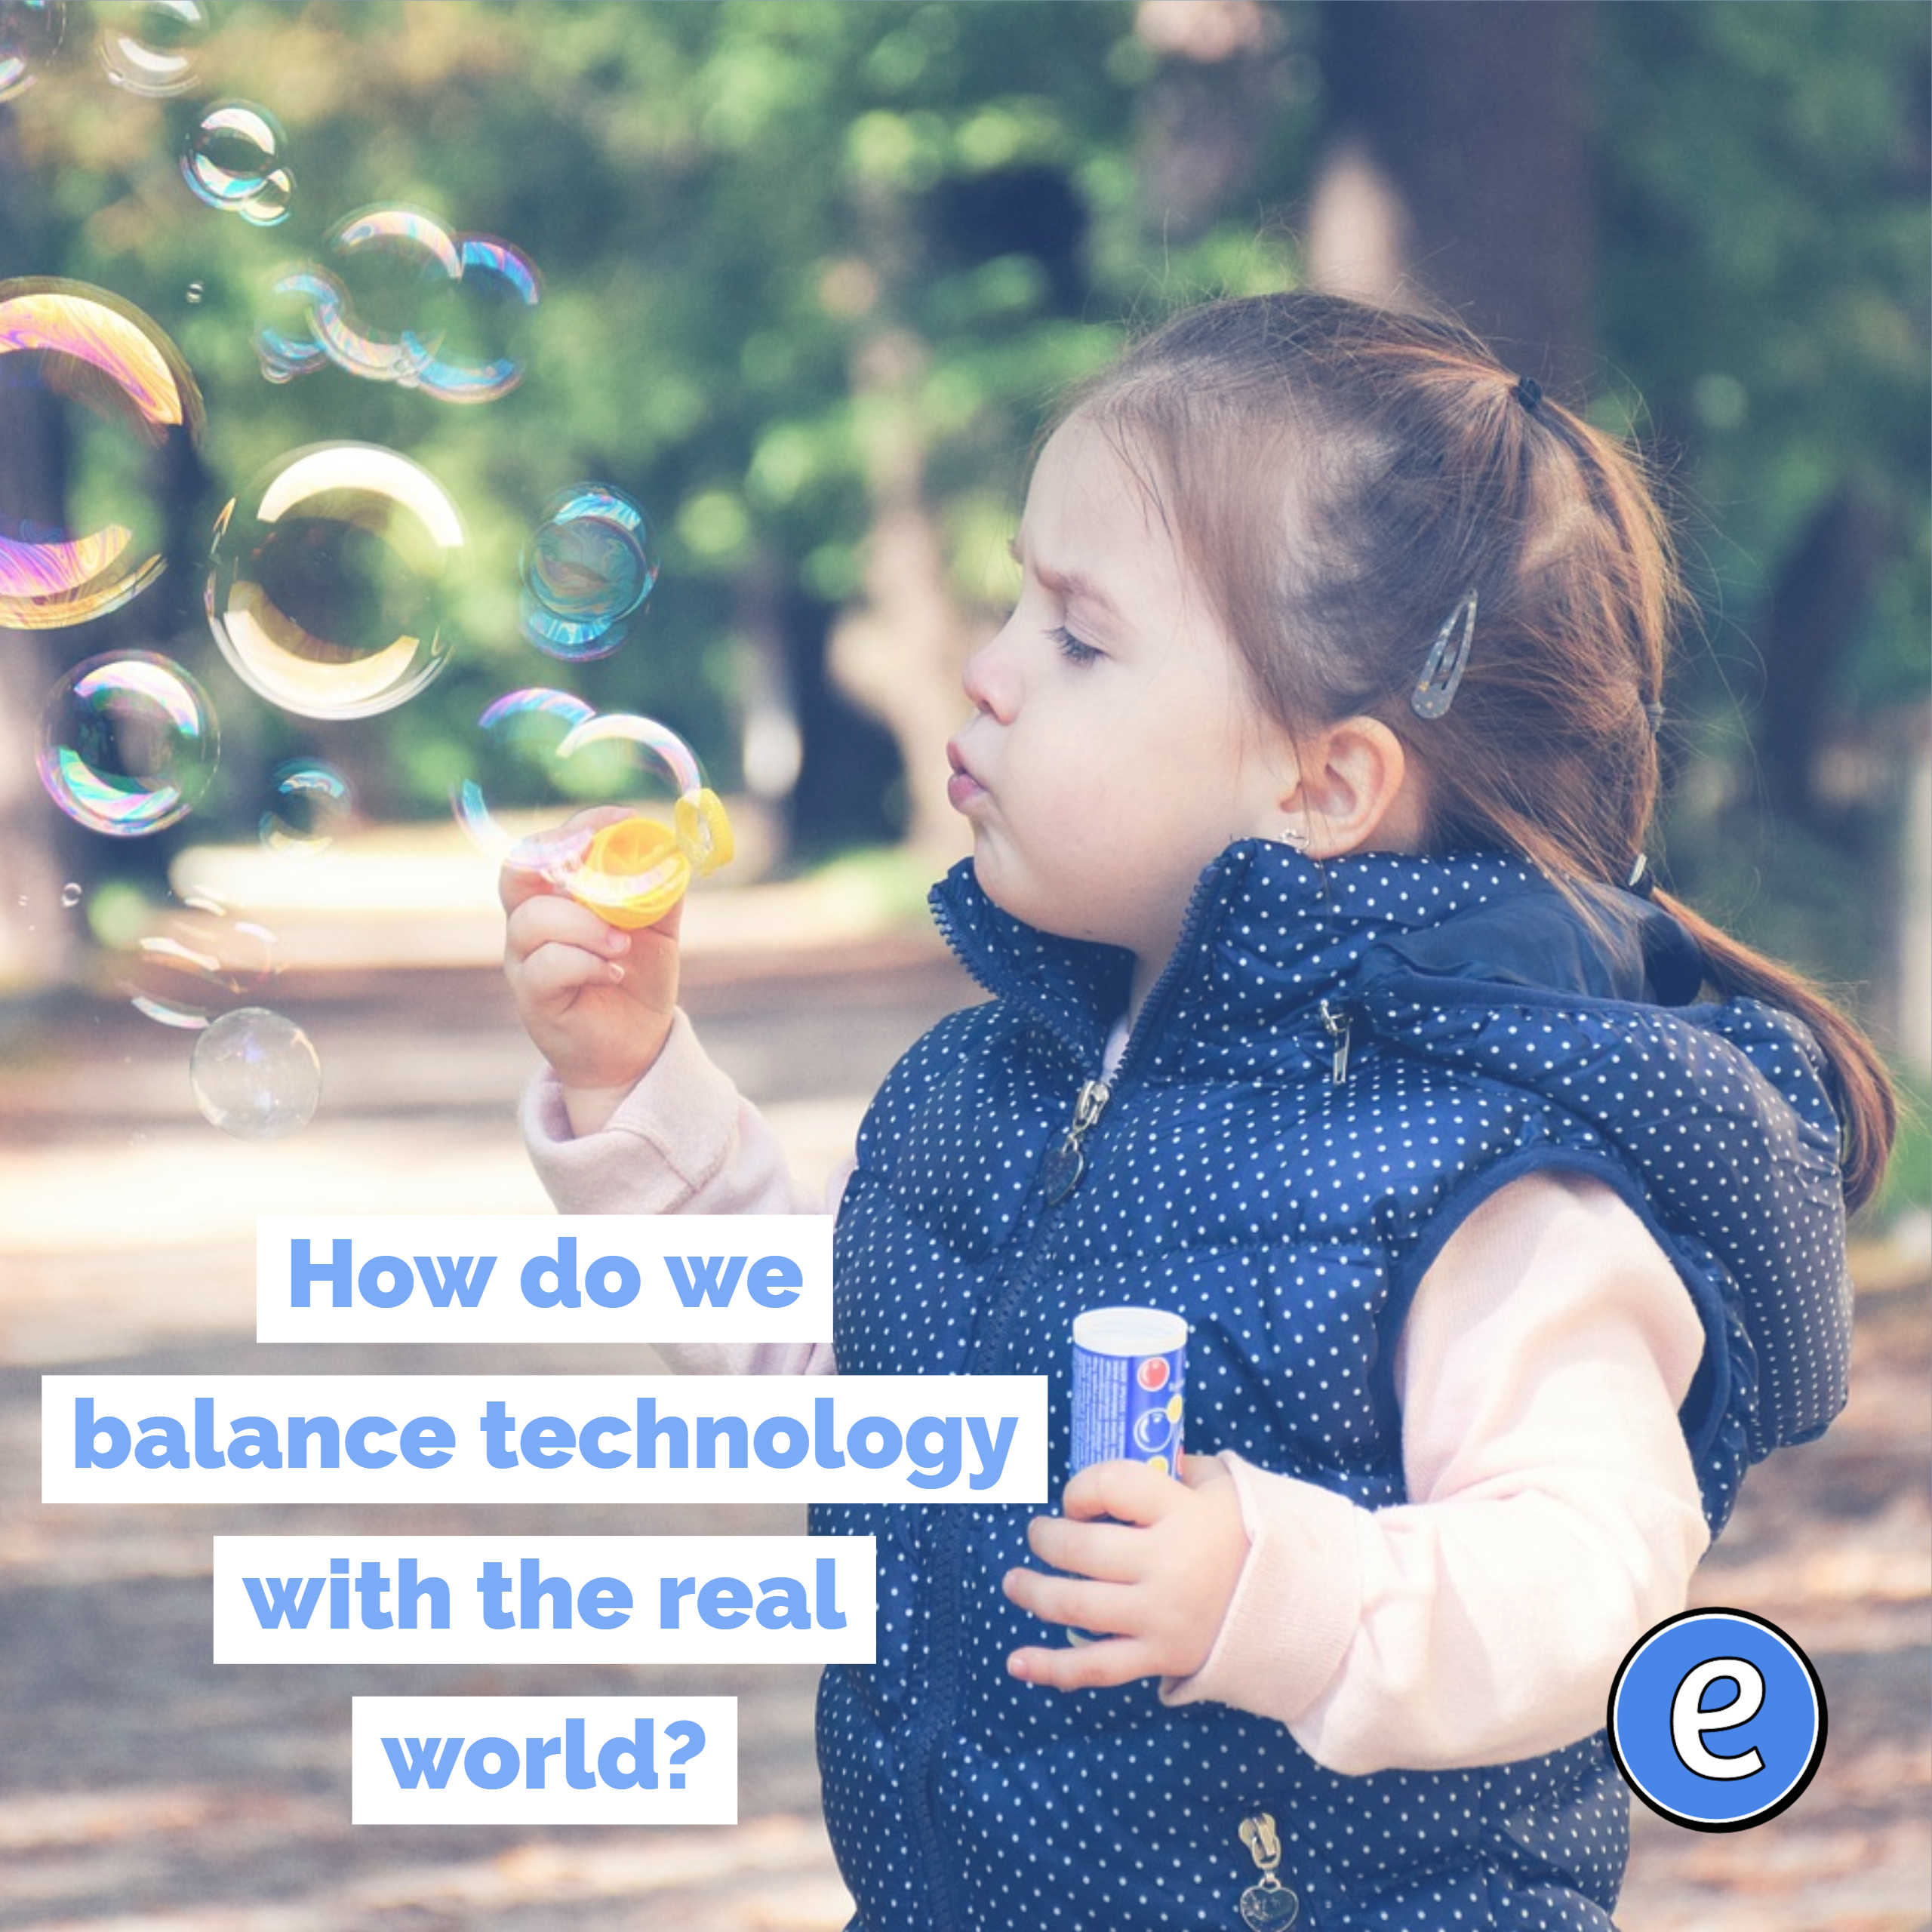 How do we balance technology with the real world?